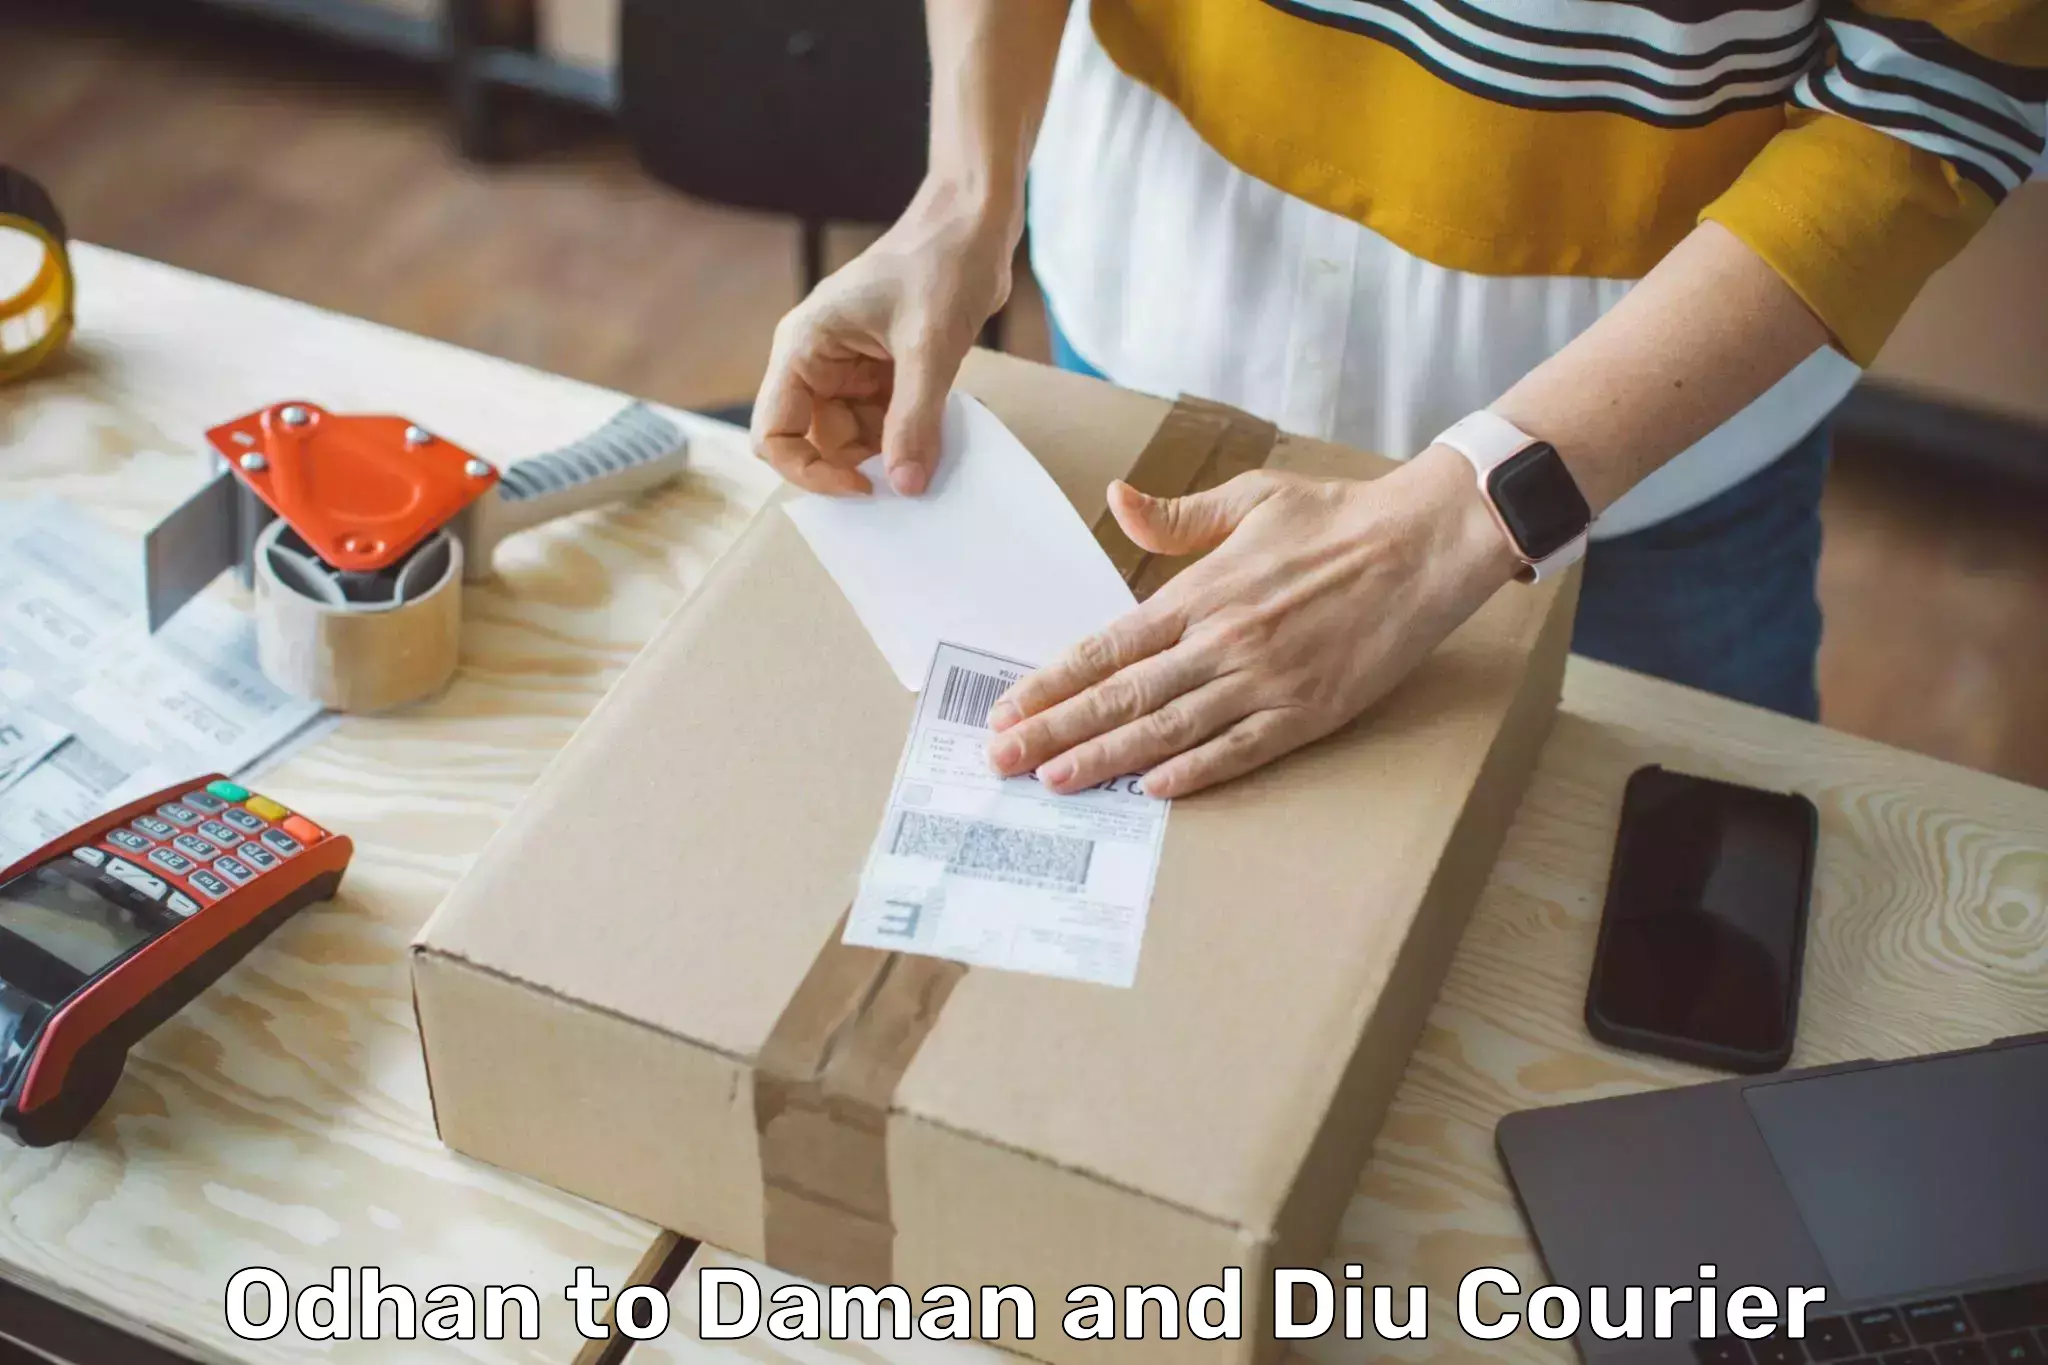 Courier service efficiency Odhan to Diu